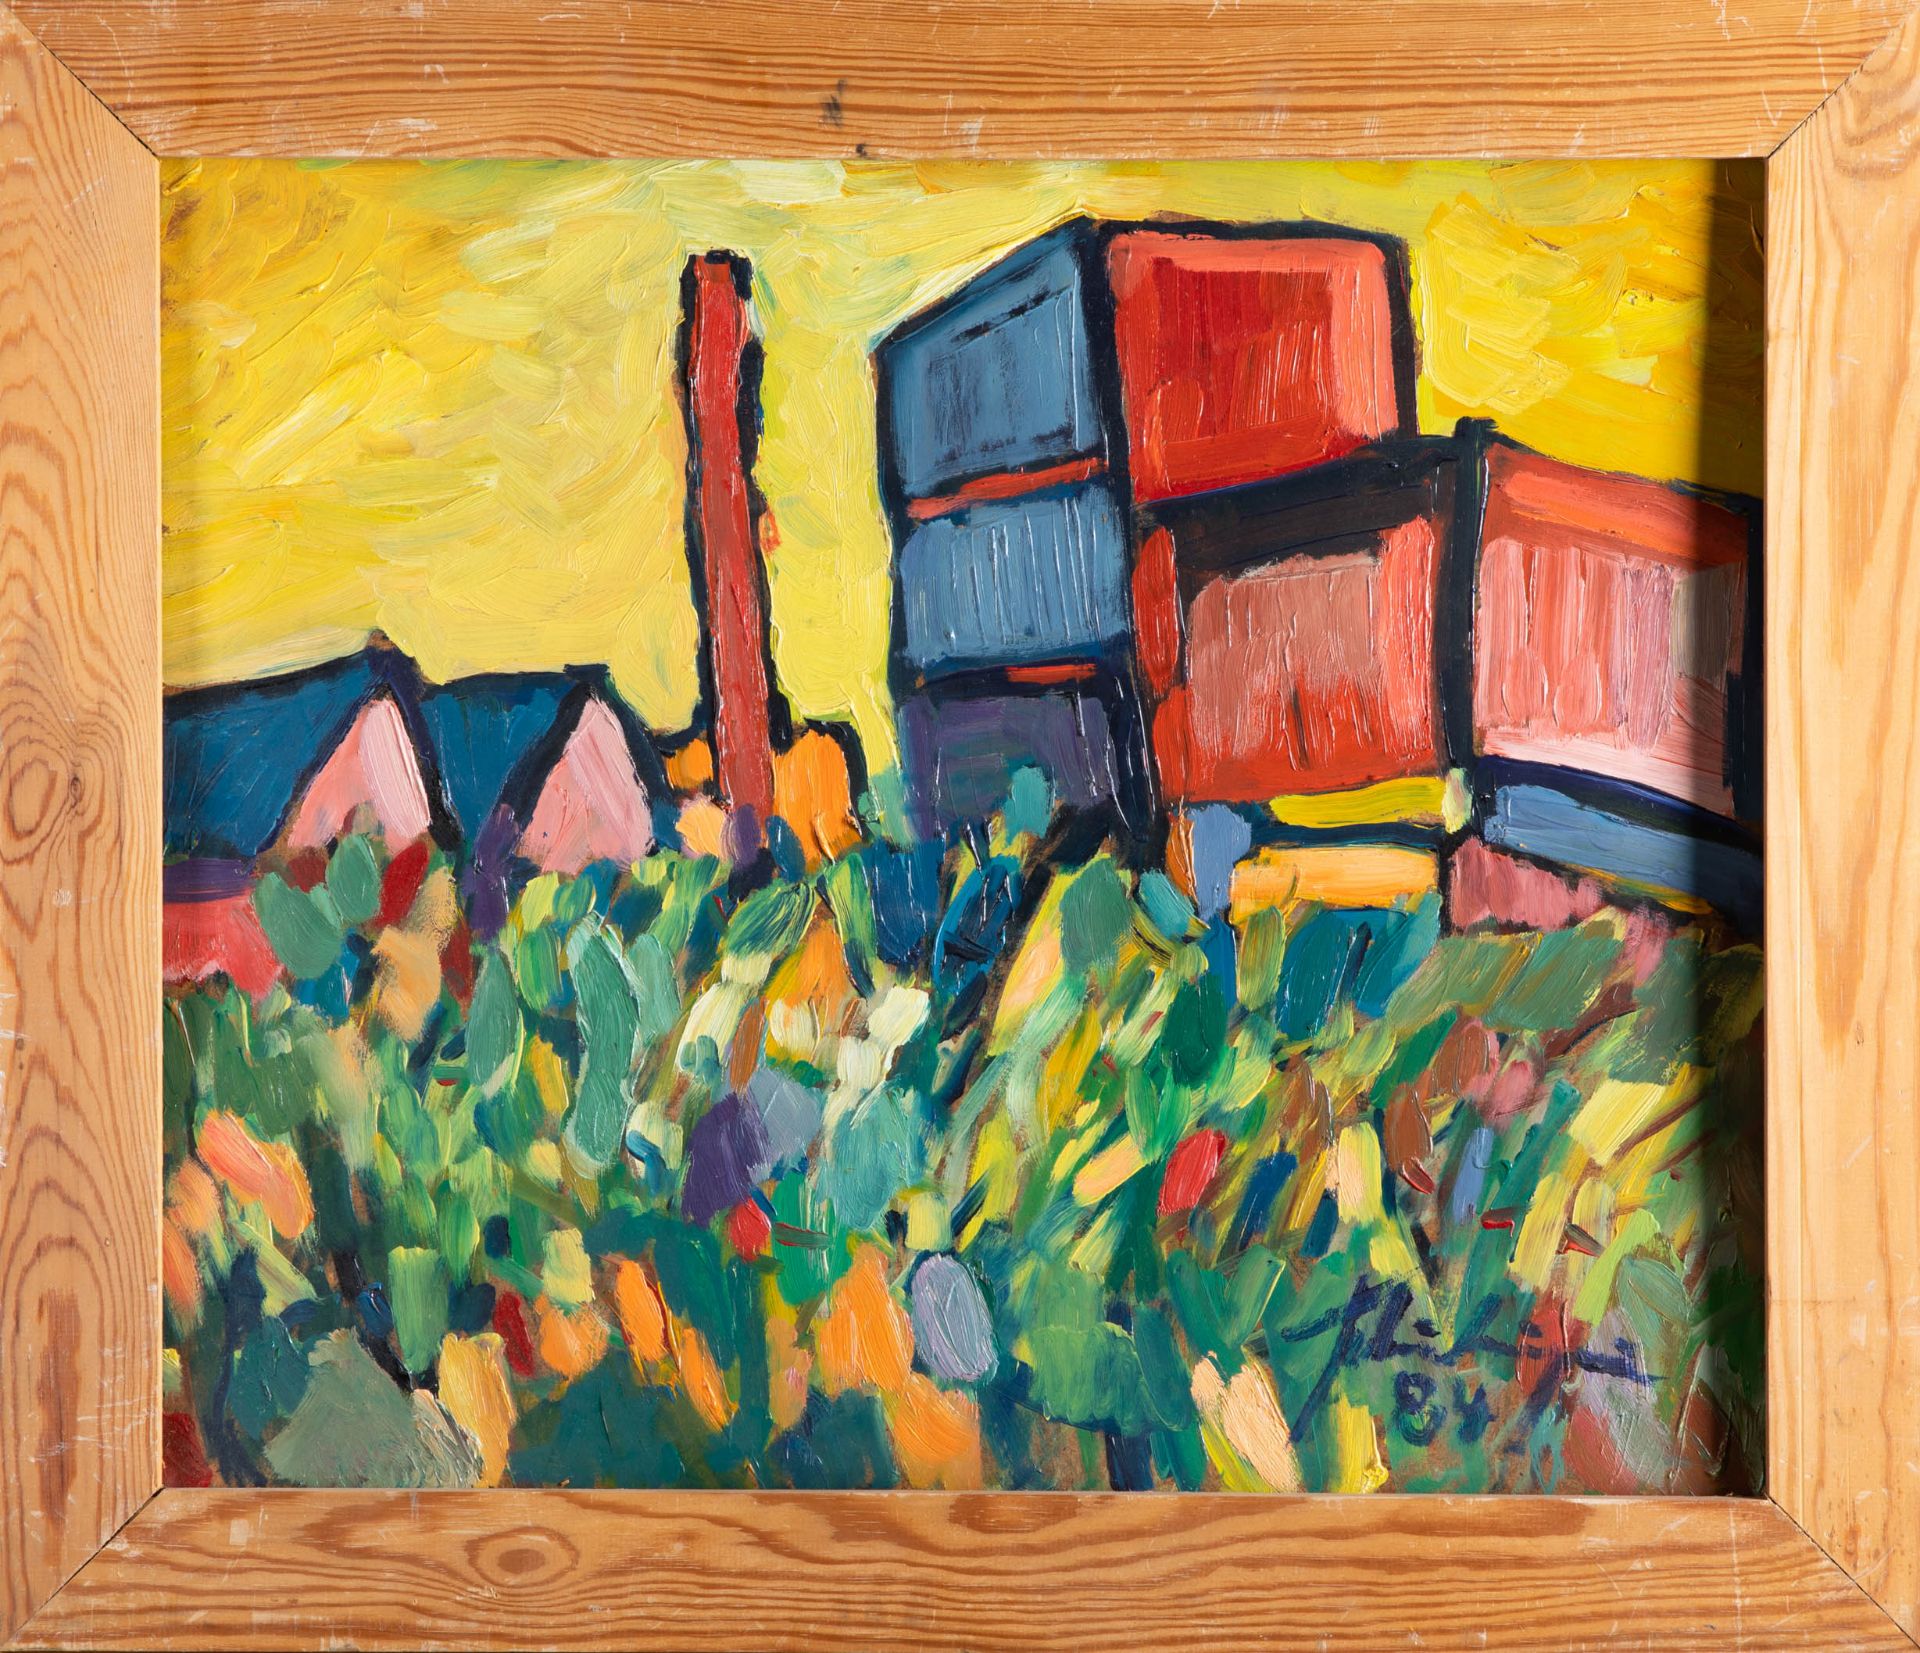 Klemens Großimlinghaus, Lower Rhine landscape with yellow sky and field of flowers, 1984 - Image 2 of 4